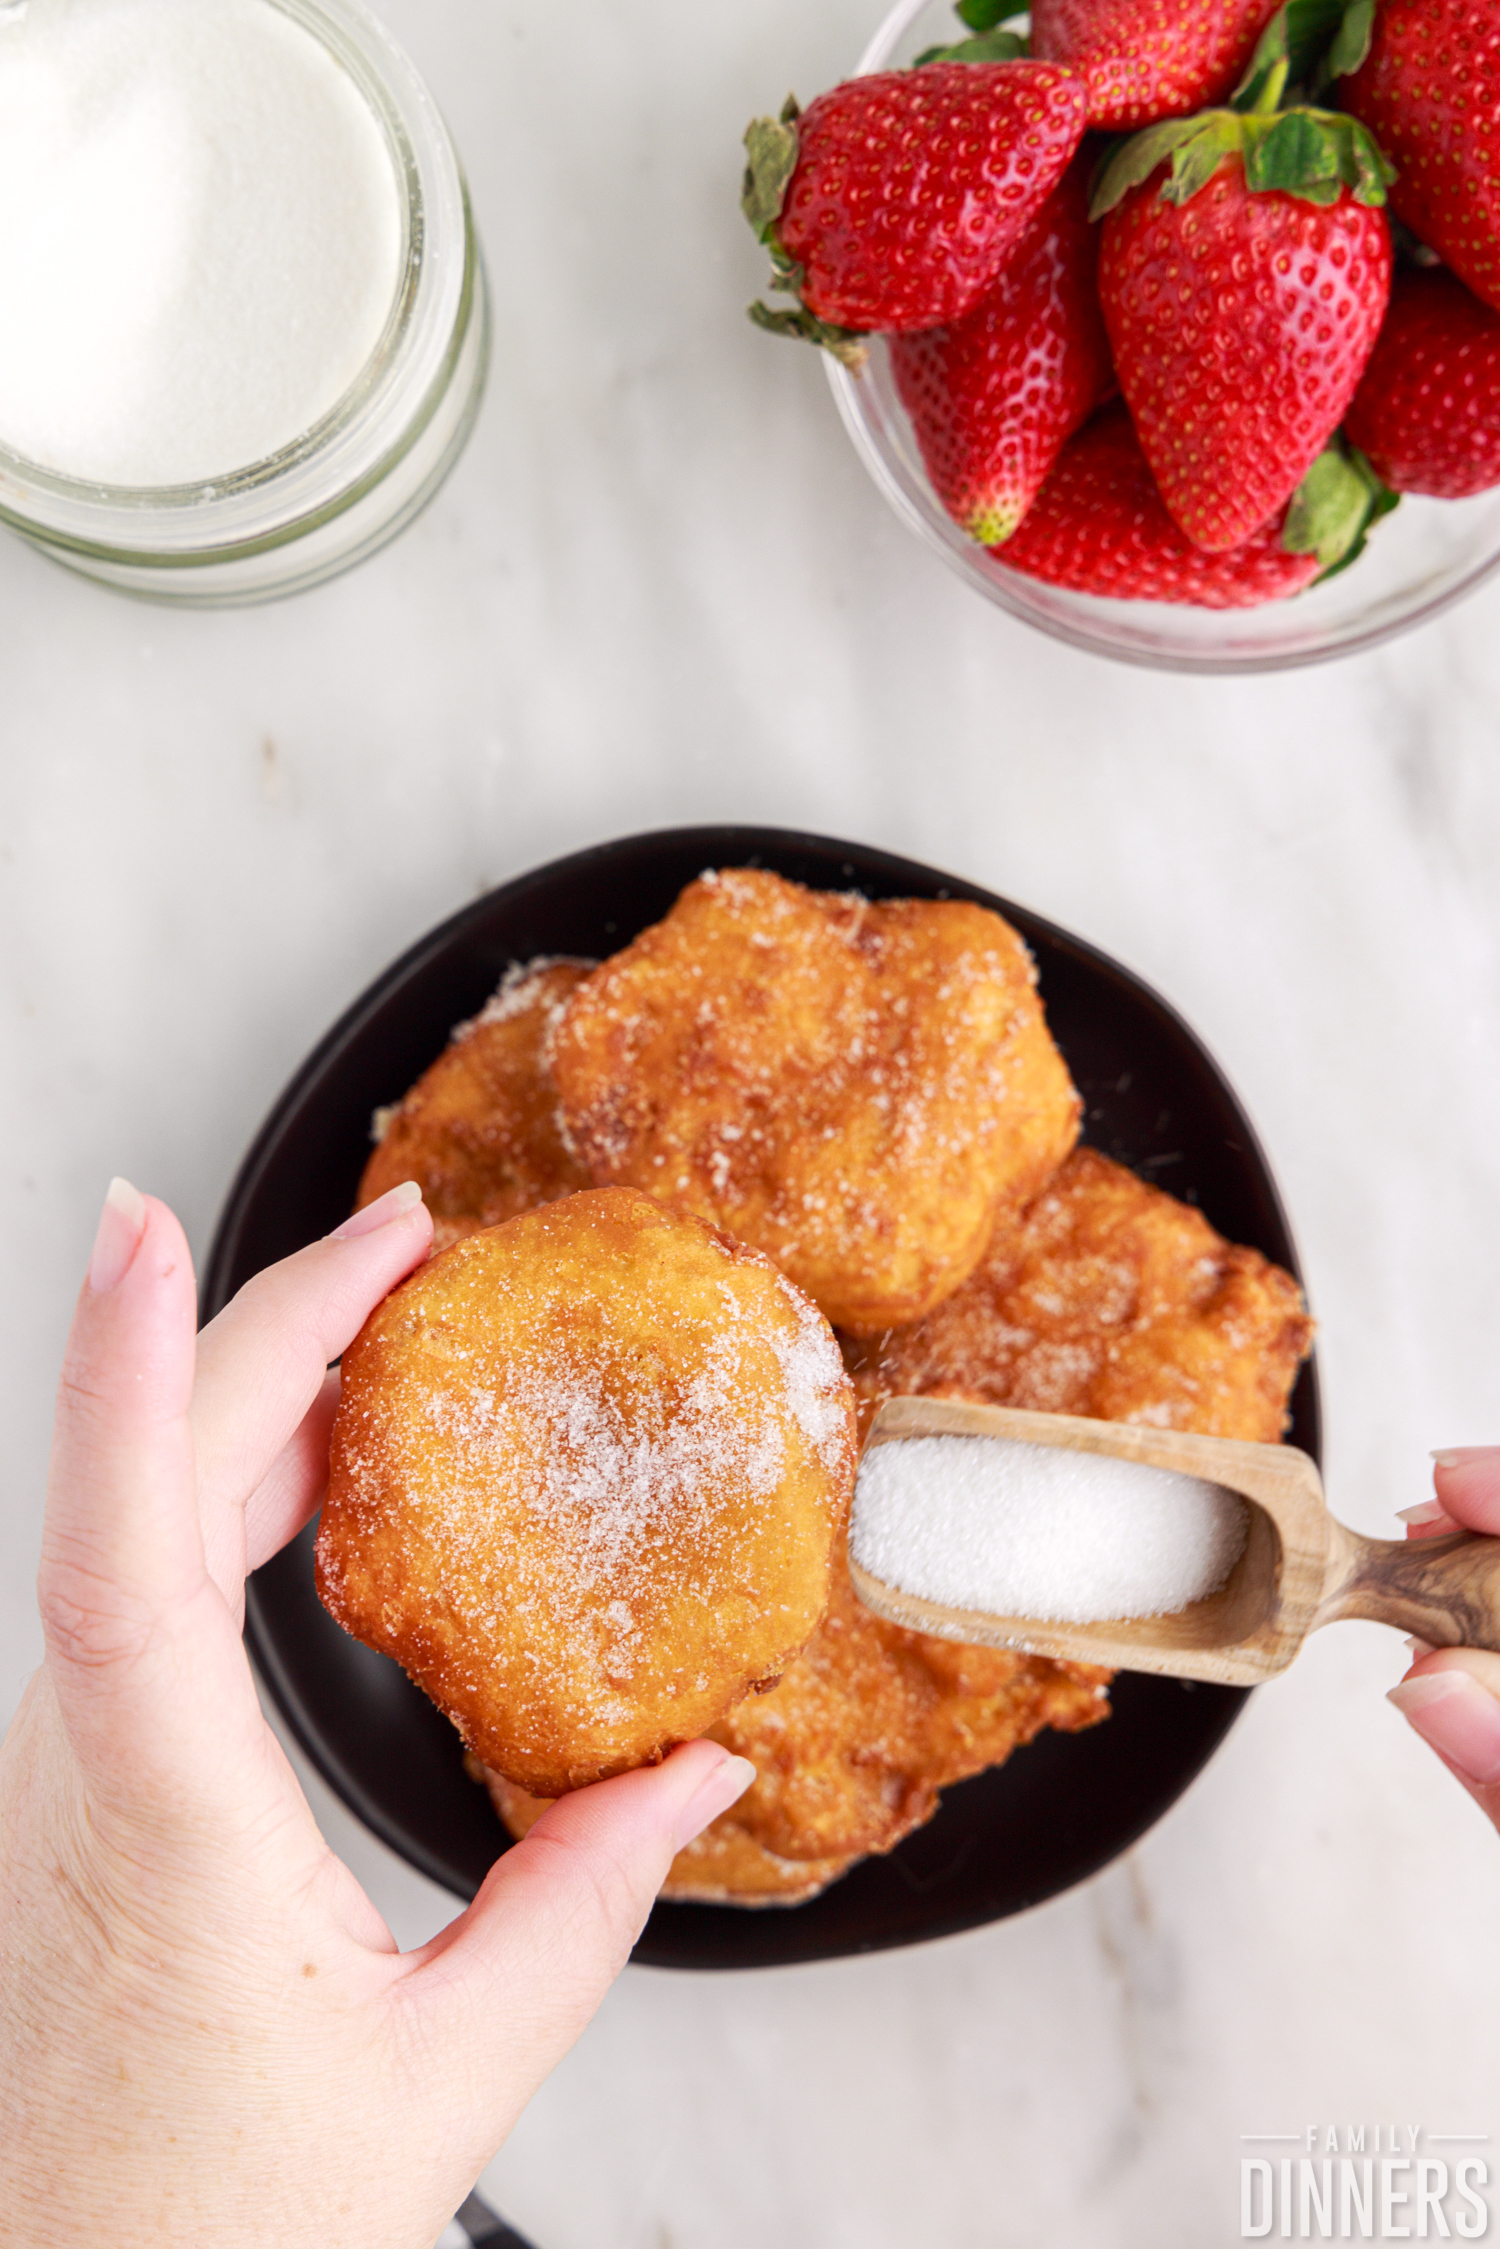 sugar pouring on deep fried biscuits